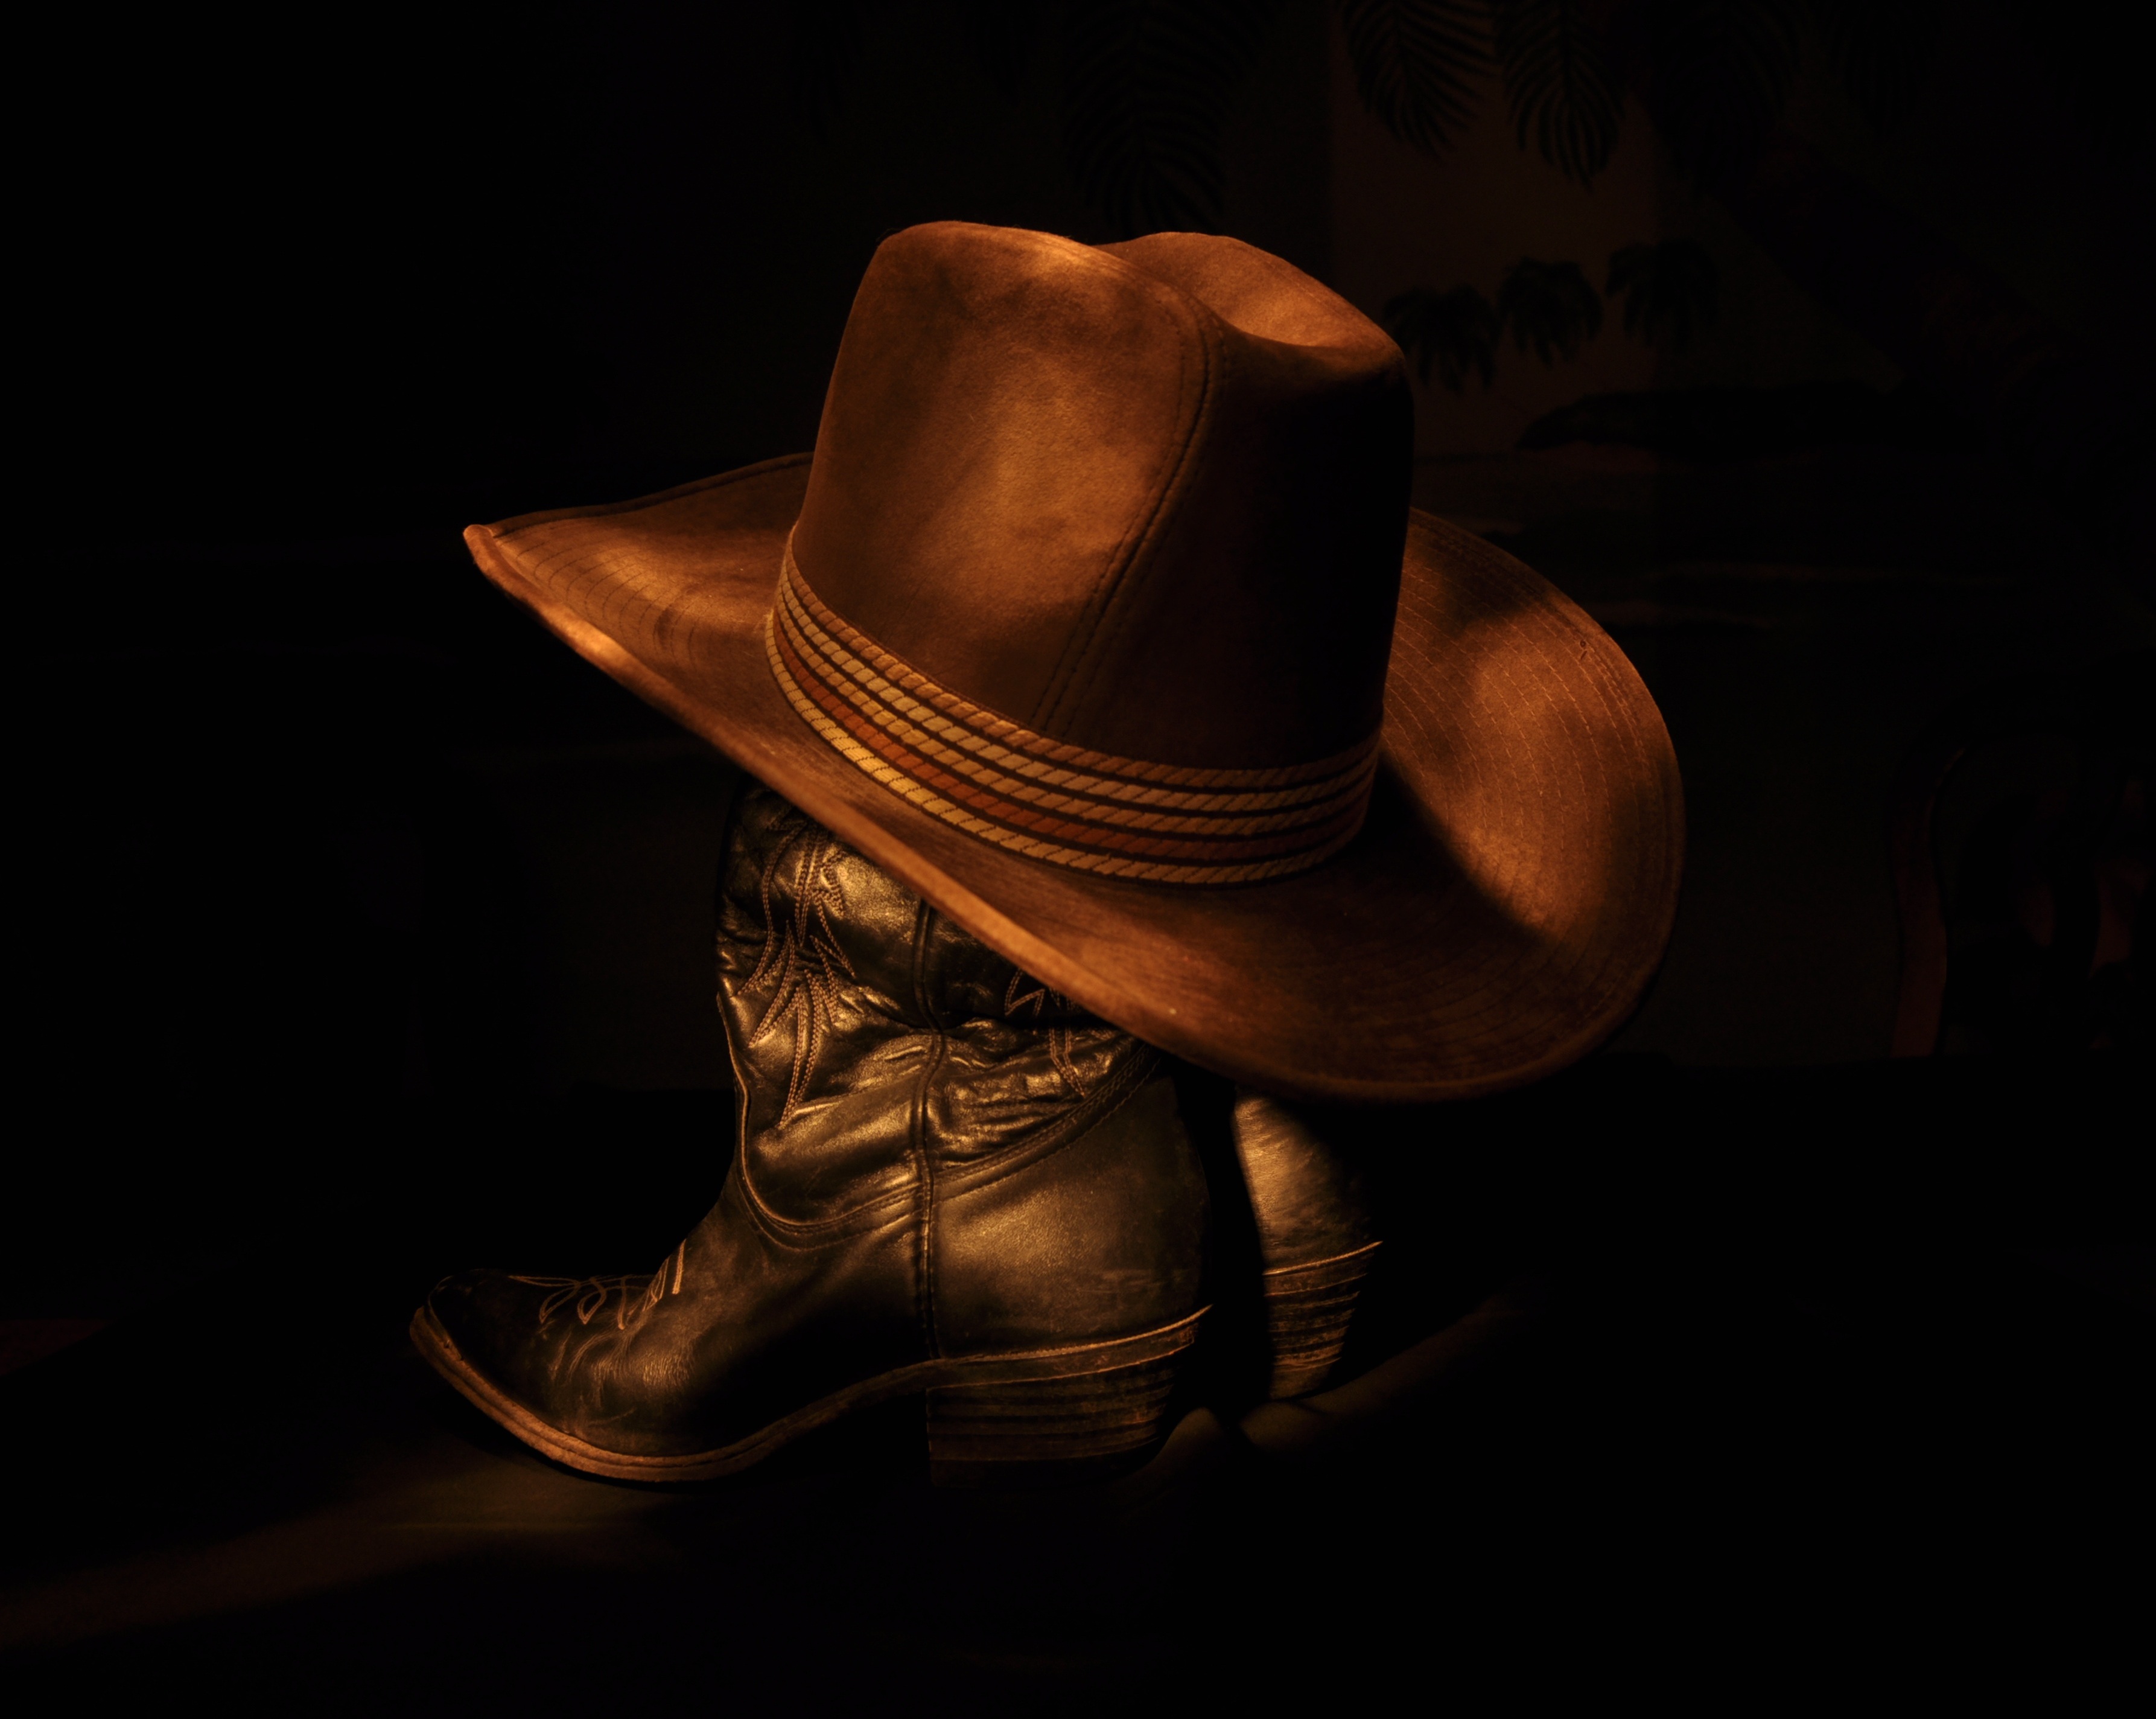 Painting Of Cowboy Boots And Hat - HD Wallpaper 